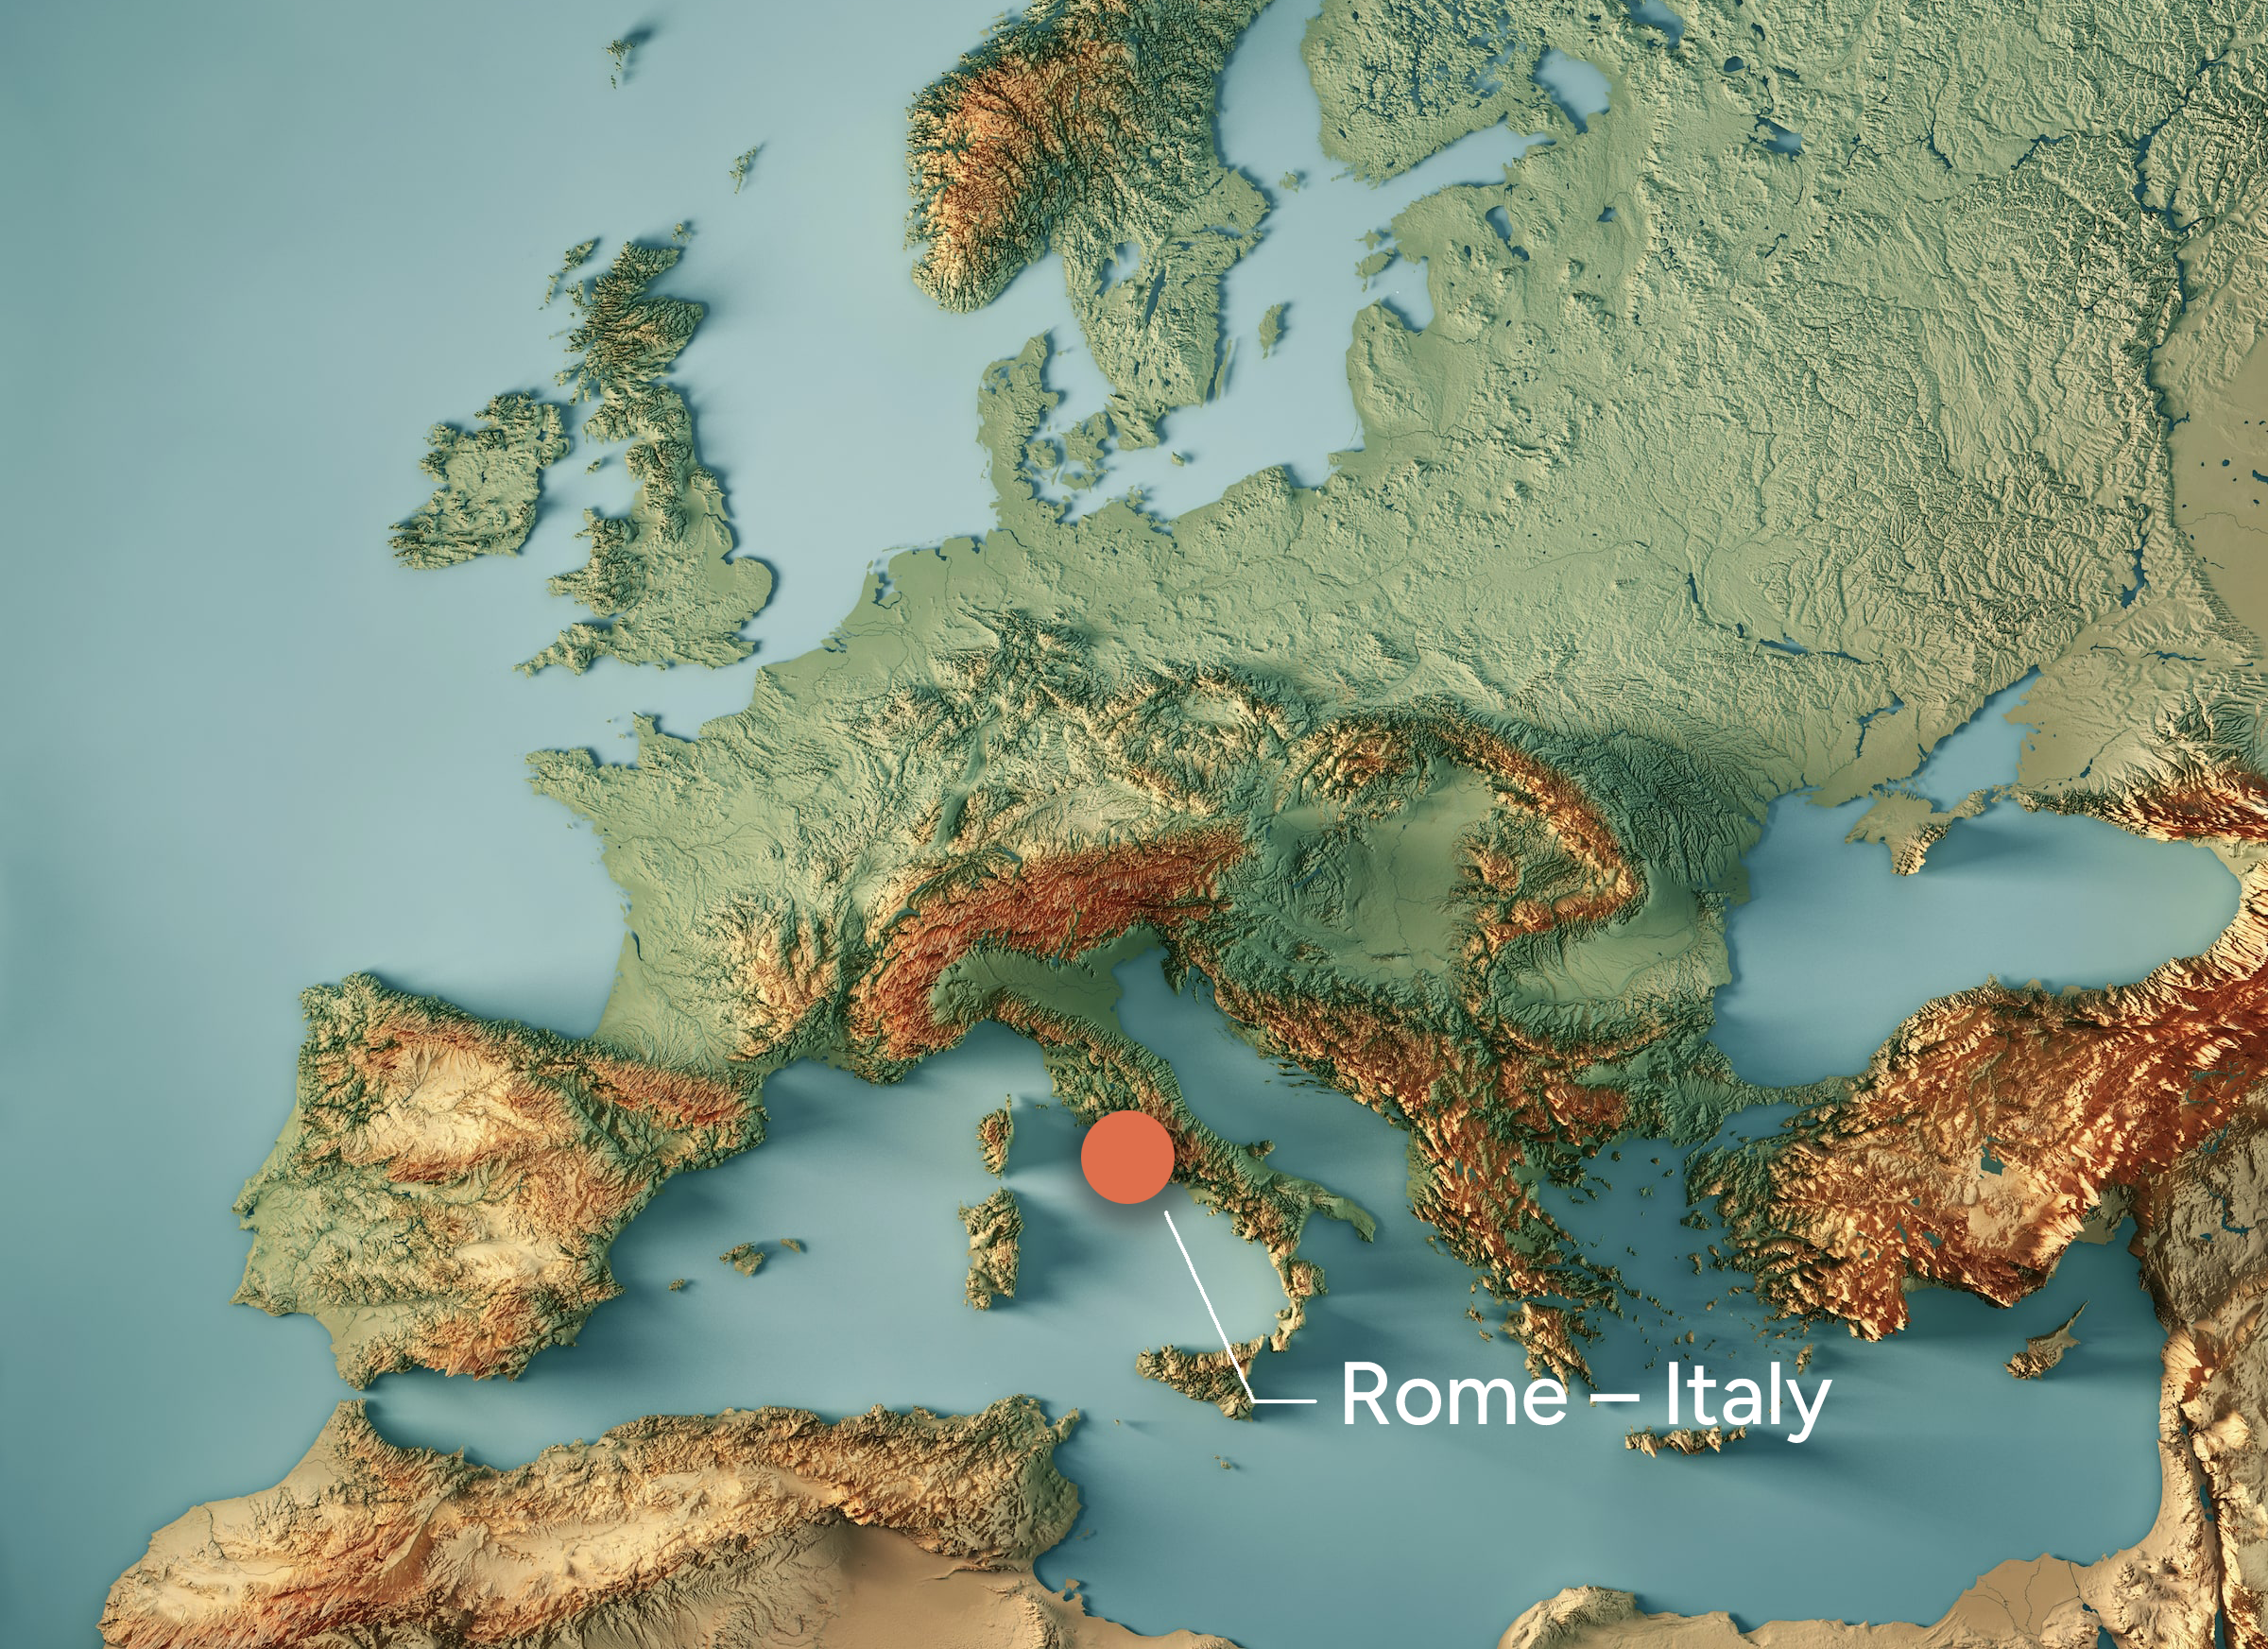 Topography map of Europe highlighting Rome, Italy